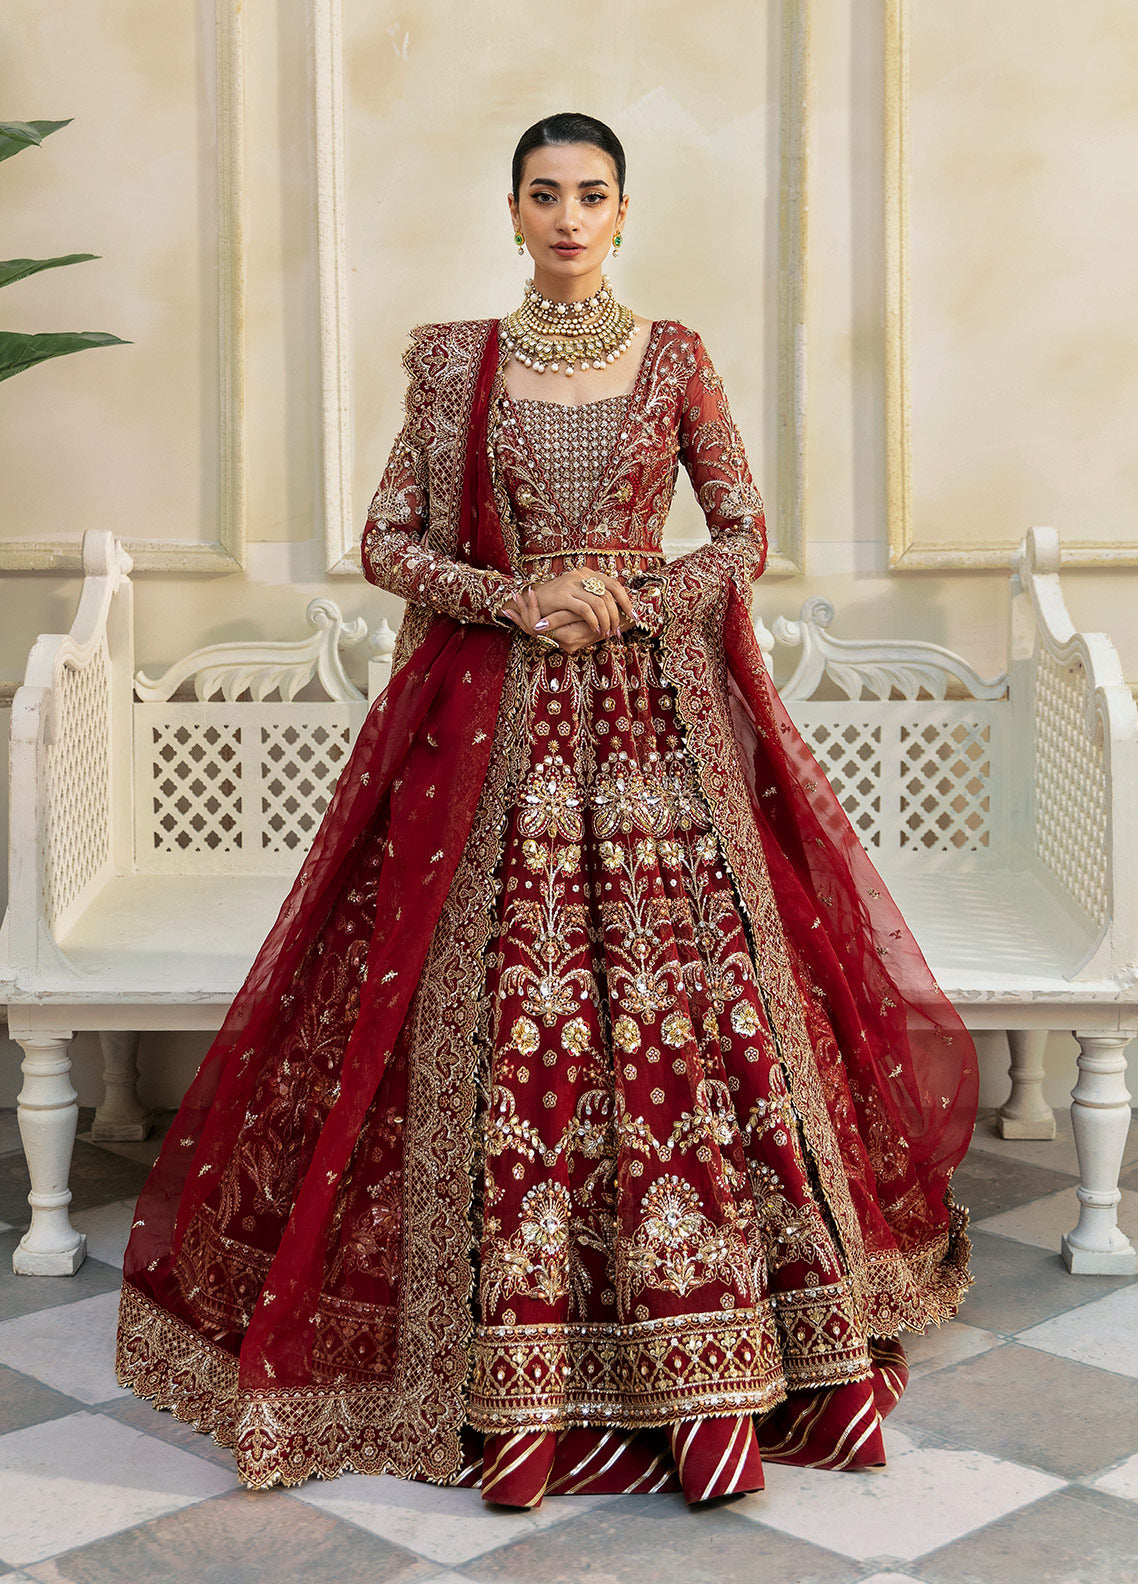 Wedding dresses for girl in Pakistan, by Acservices